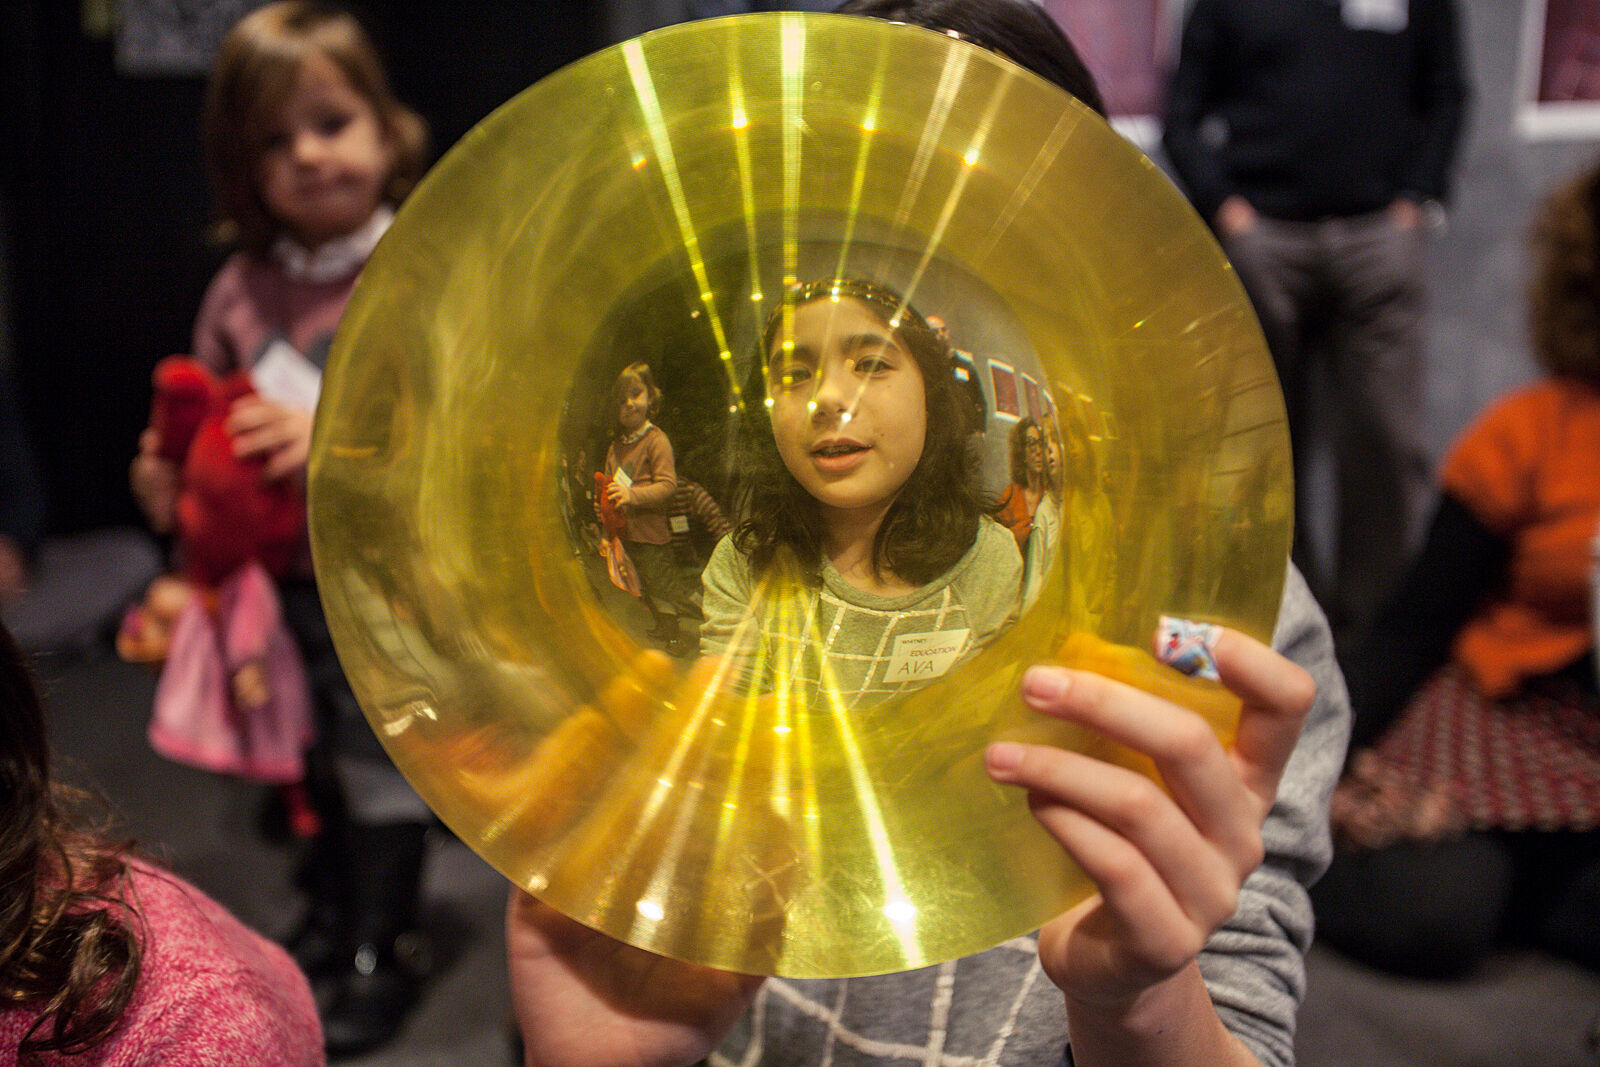 A child holds up a piece of yellow glass